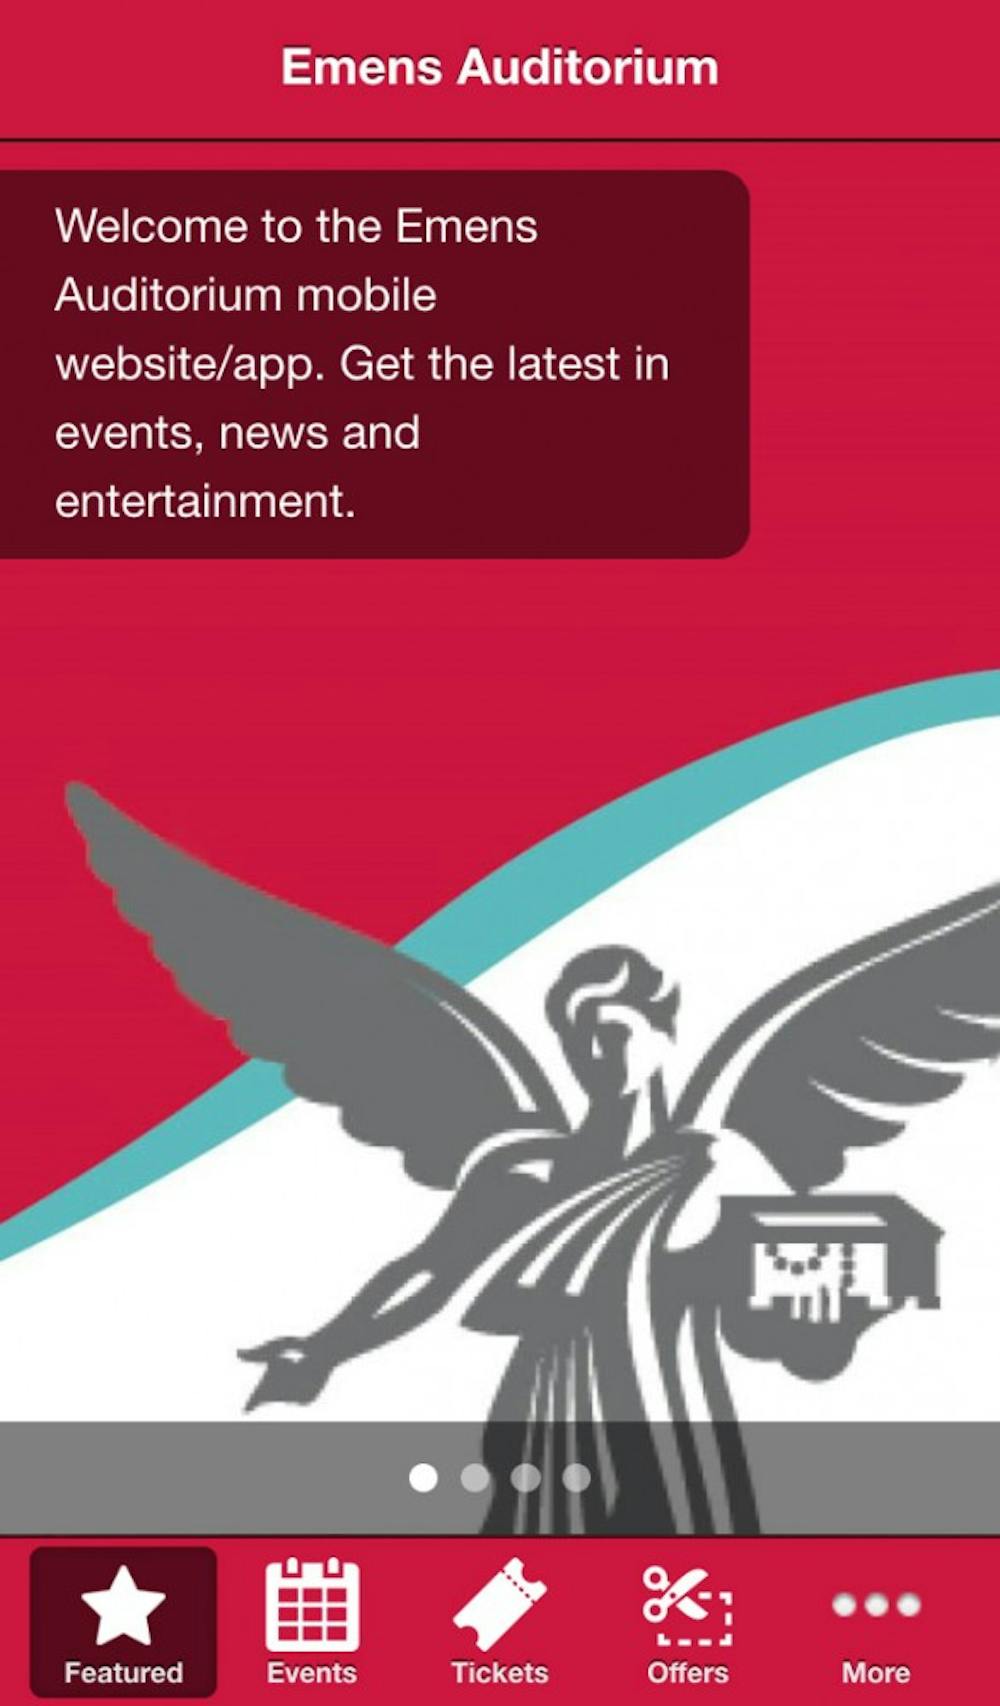 <p>A new app powered through Instant Encore&nbsp;is getting Ball State students and the community more engaged in the latest news and events happening at John R. Emens Auditorium.&nbsp;<i style="background-color: initial;">PHOTO COURTESY OF THE EMENS AUDITORIUM APP</i></p>